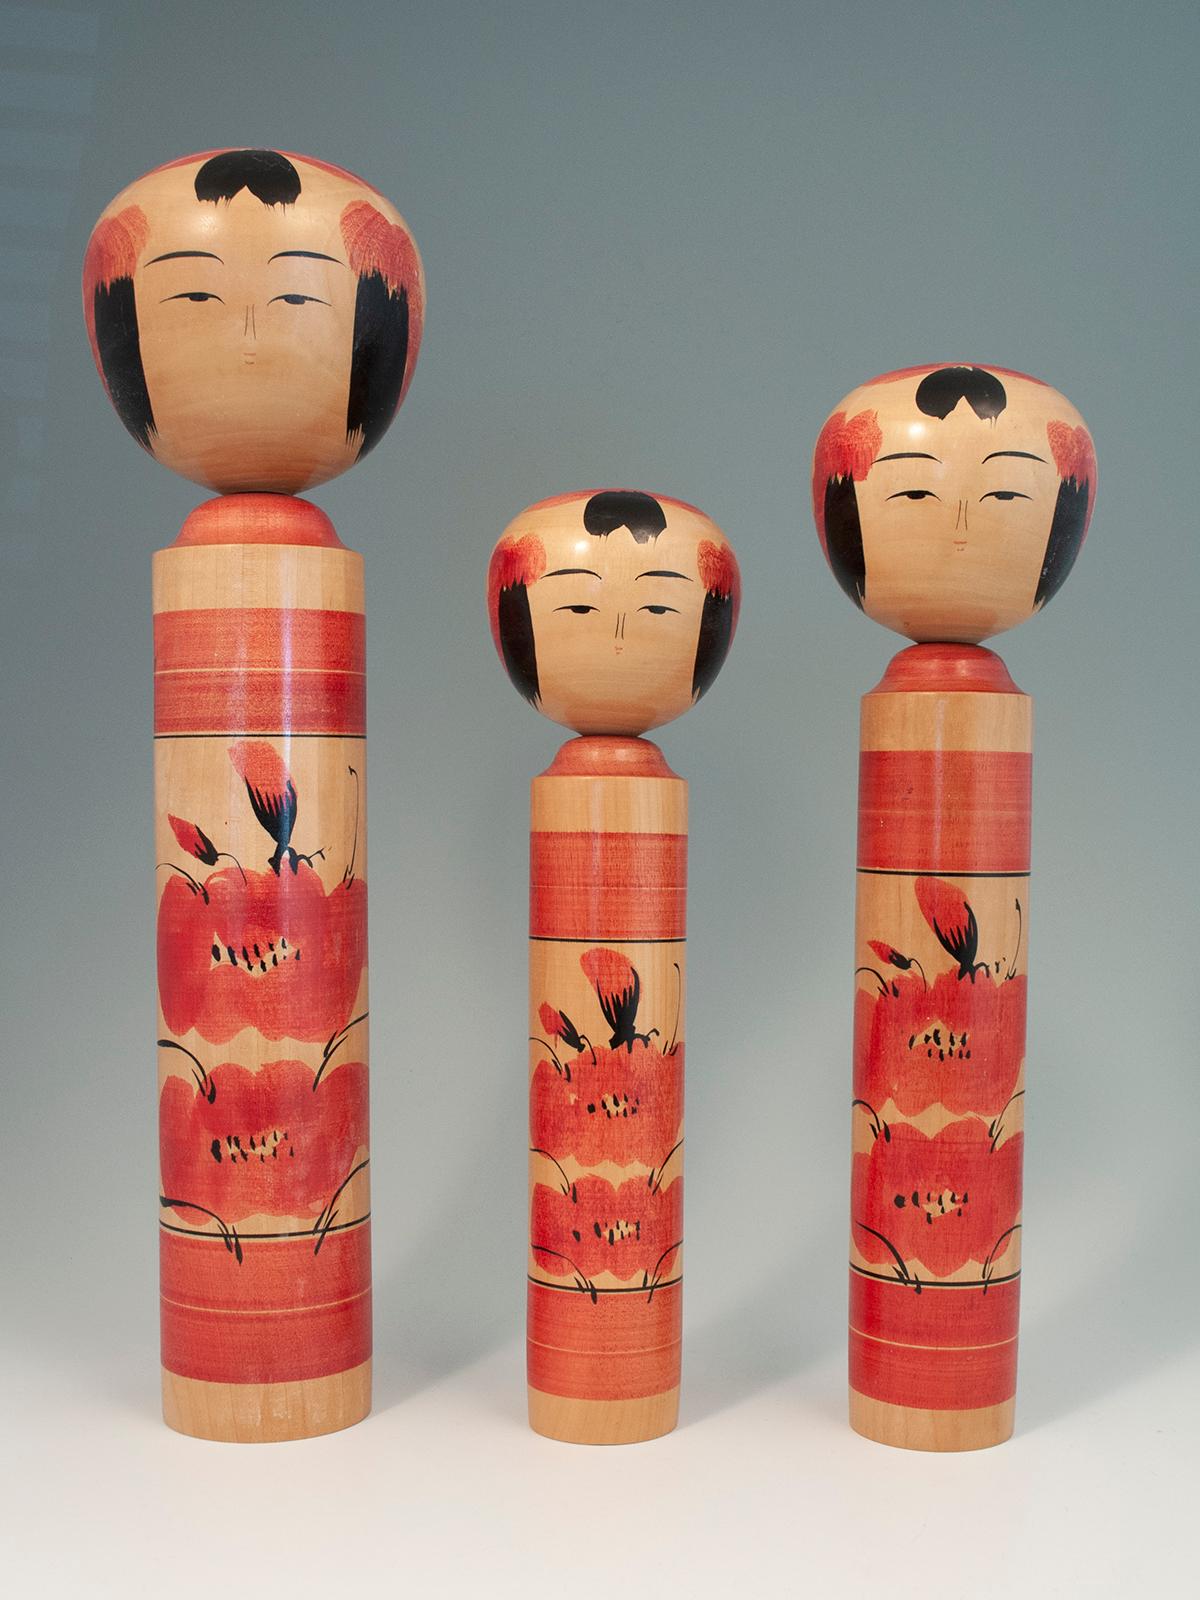 Trio of Traditional Kokeshi Dolls by Masahiro Satomi (1948-1994), Japan

Three traditional kokeshi dolls created and signed by Masahiro Satomi (1948-1994). They measure 14.5, 12 and 10.5 inches high. In good condition, with some shellac loss on head